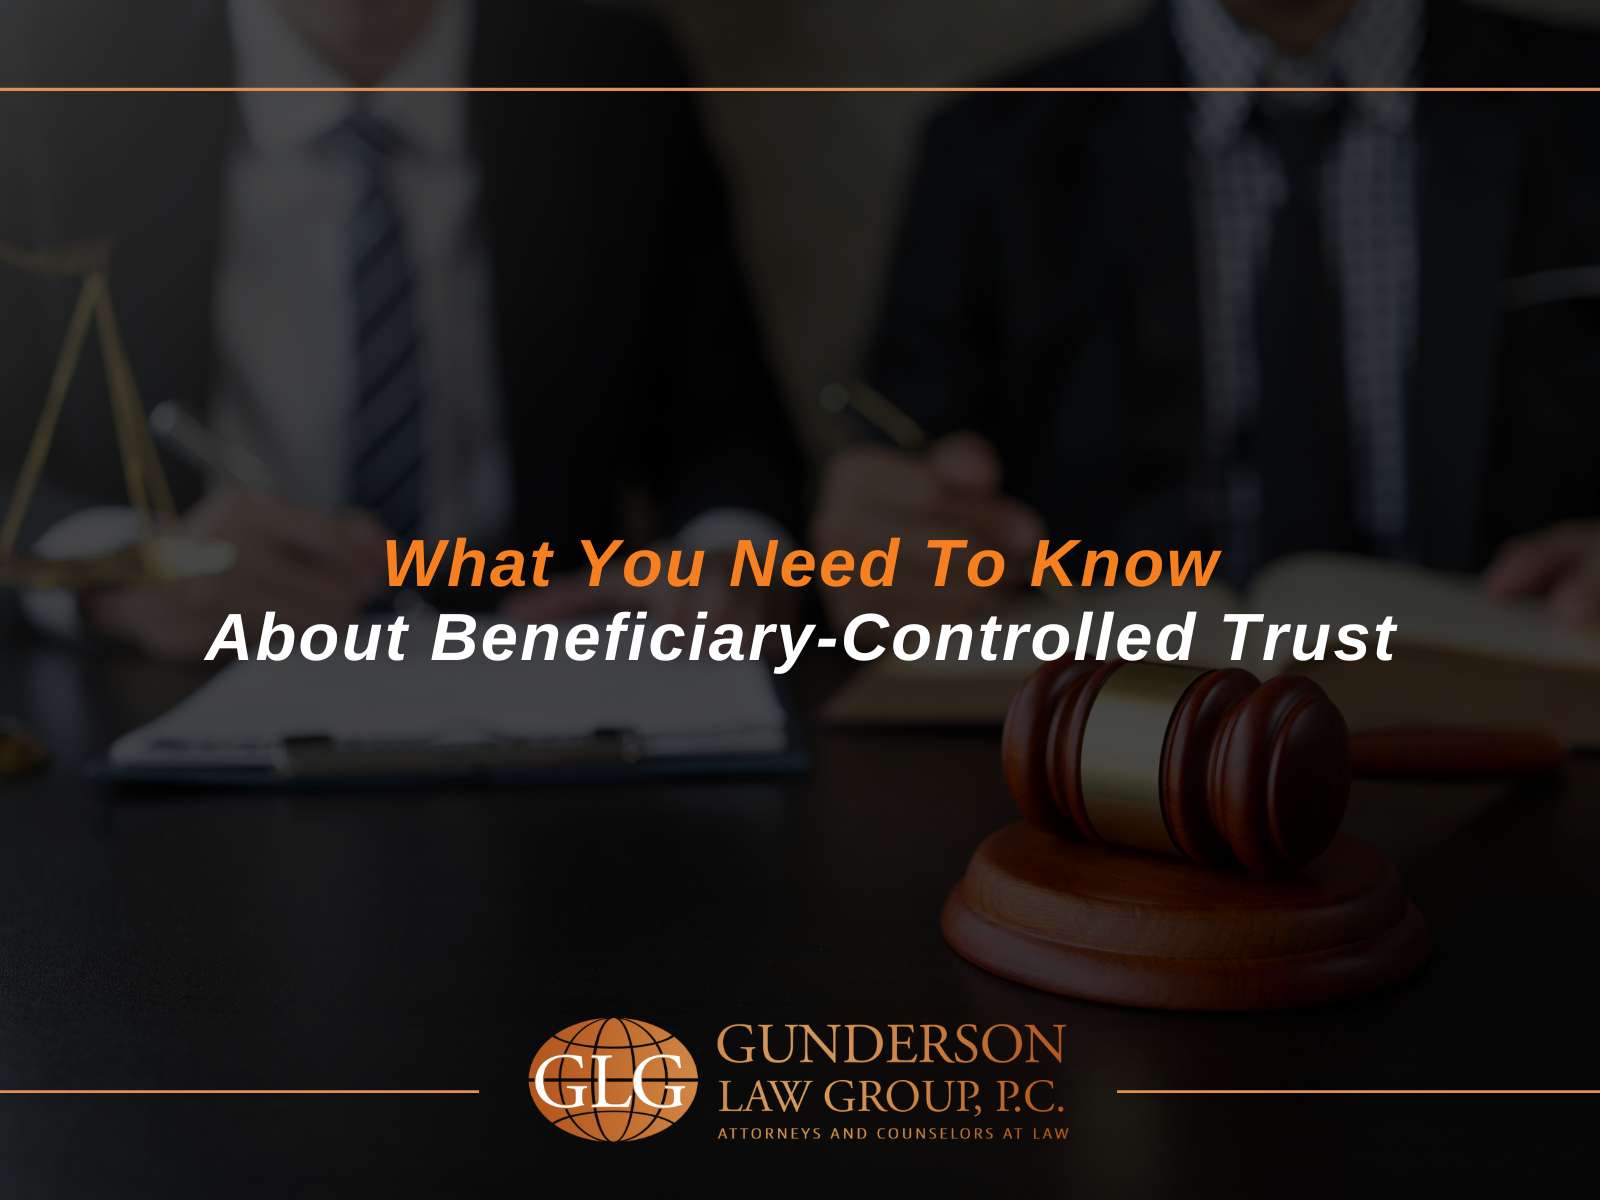 What You Need To Know About Beneficiary-Controlled Trust